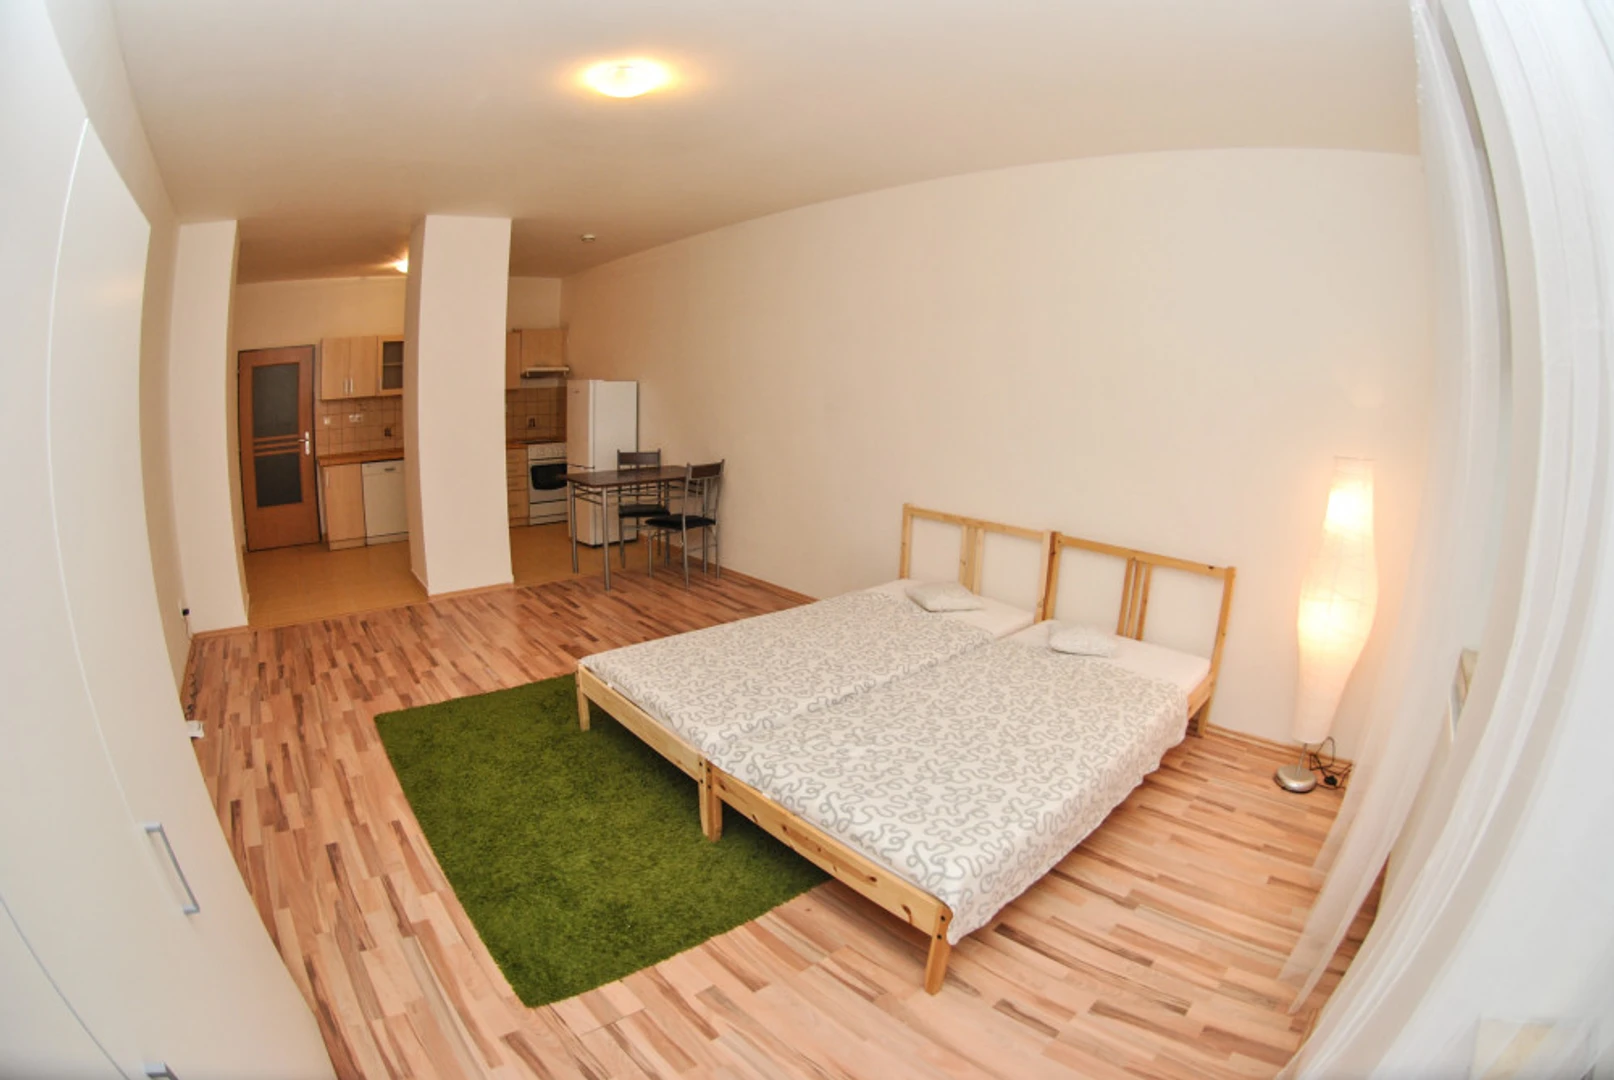 Accommodation with 3 bedrooms in Brno